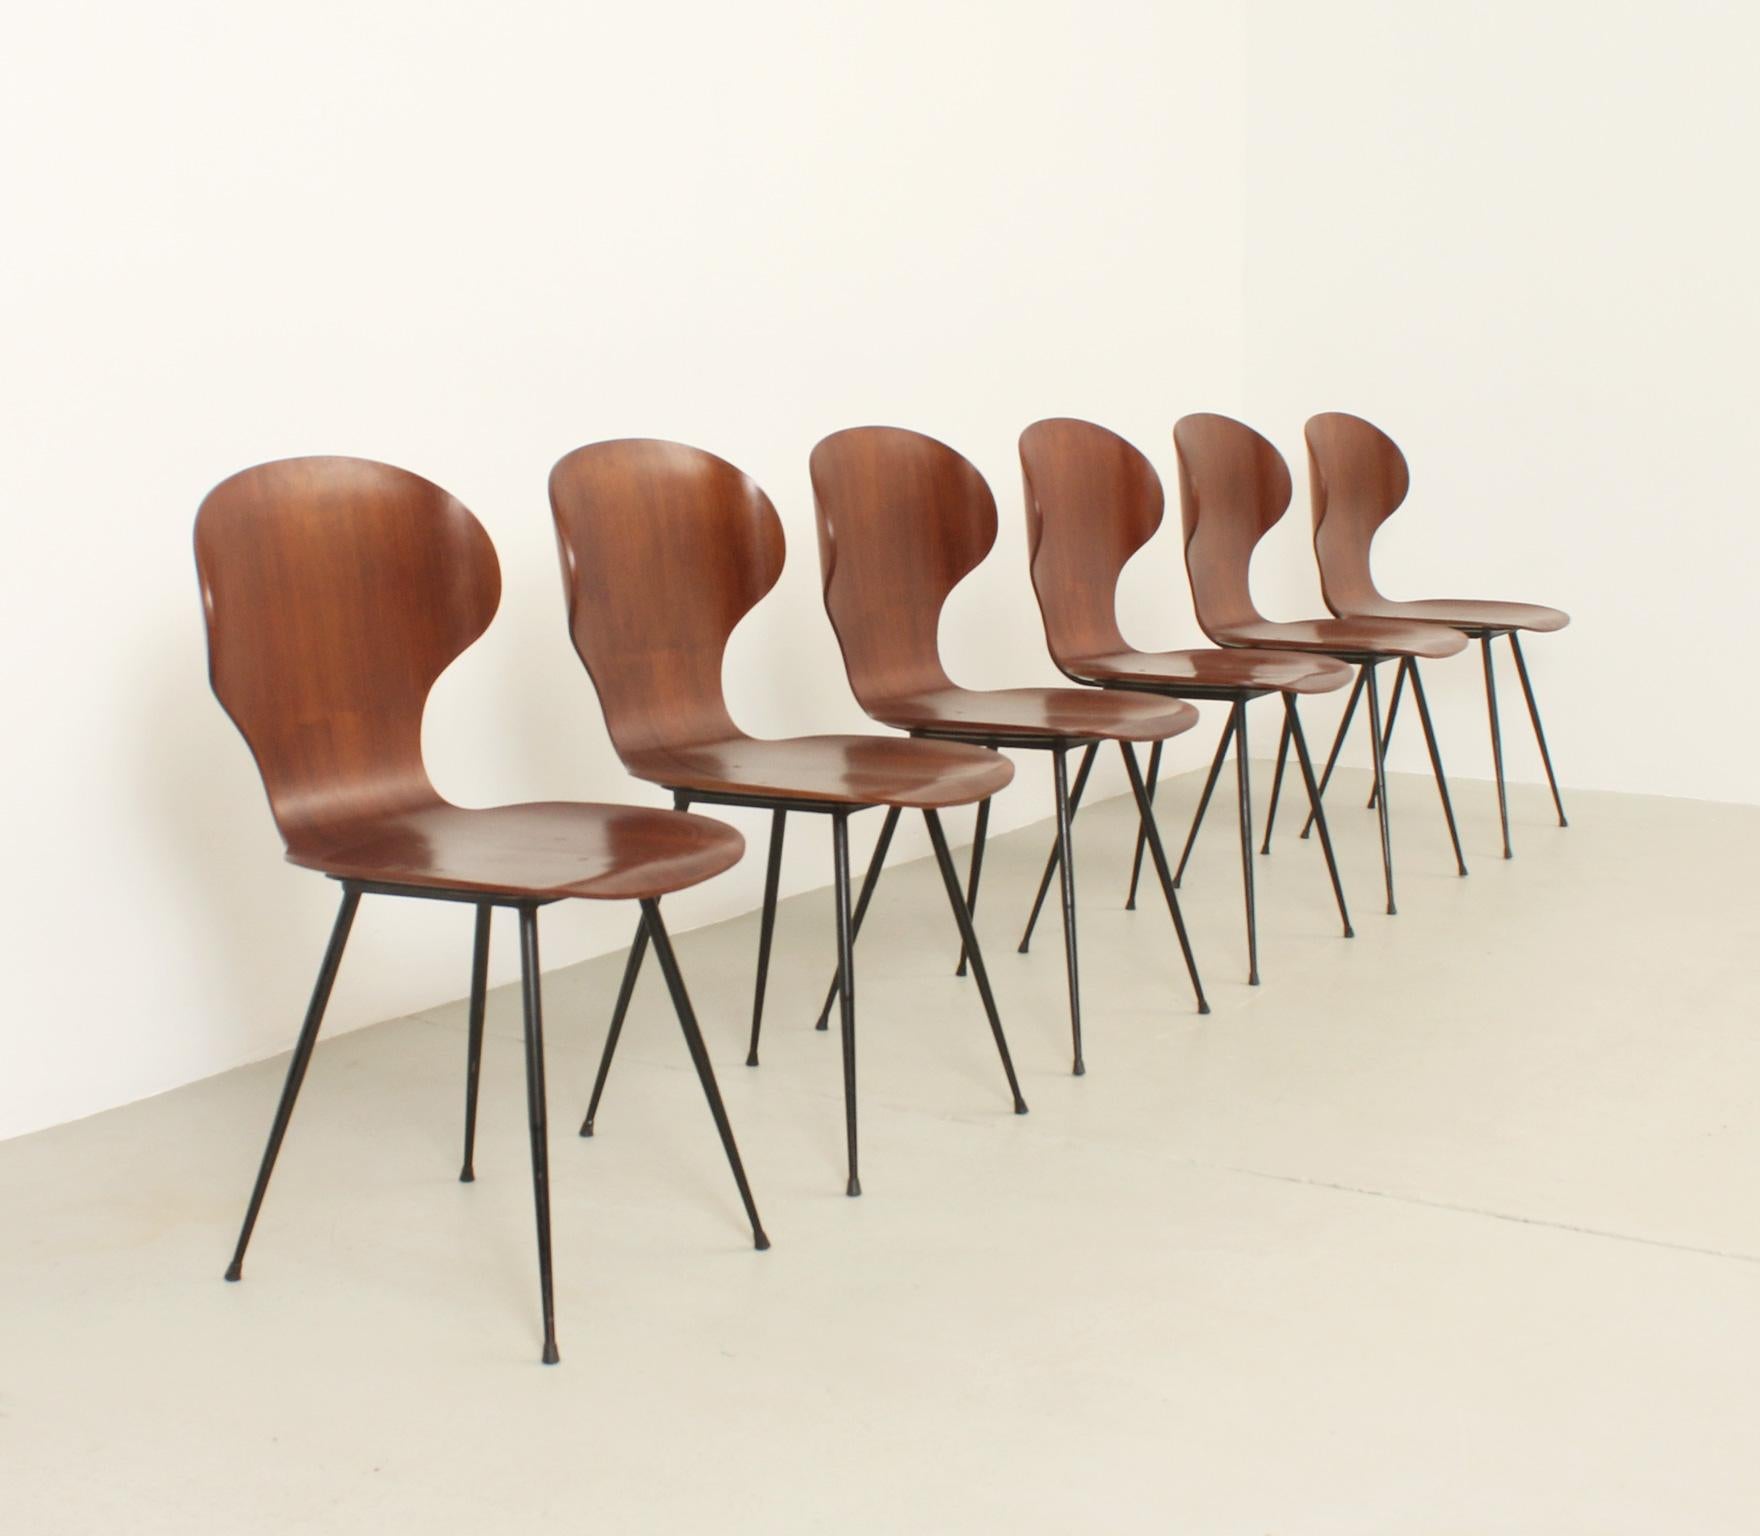 A set of six chairs designed by Carlo Ratti for Industria Legni Curvati Lissoni, Italy, 1950's. Plywood seat and black metal base. 